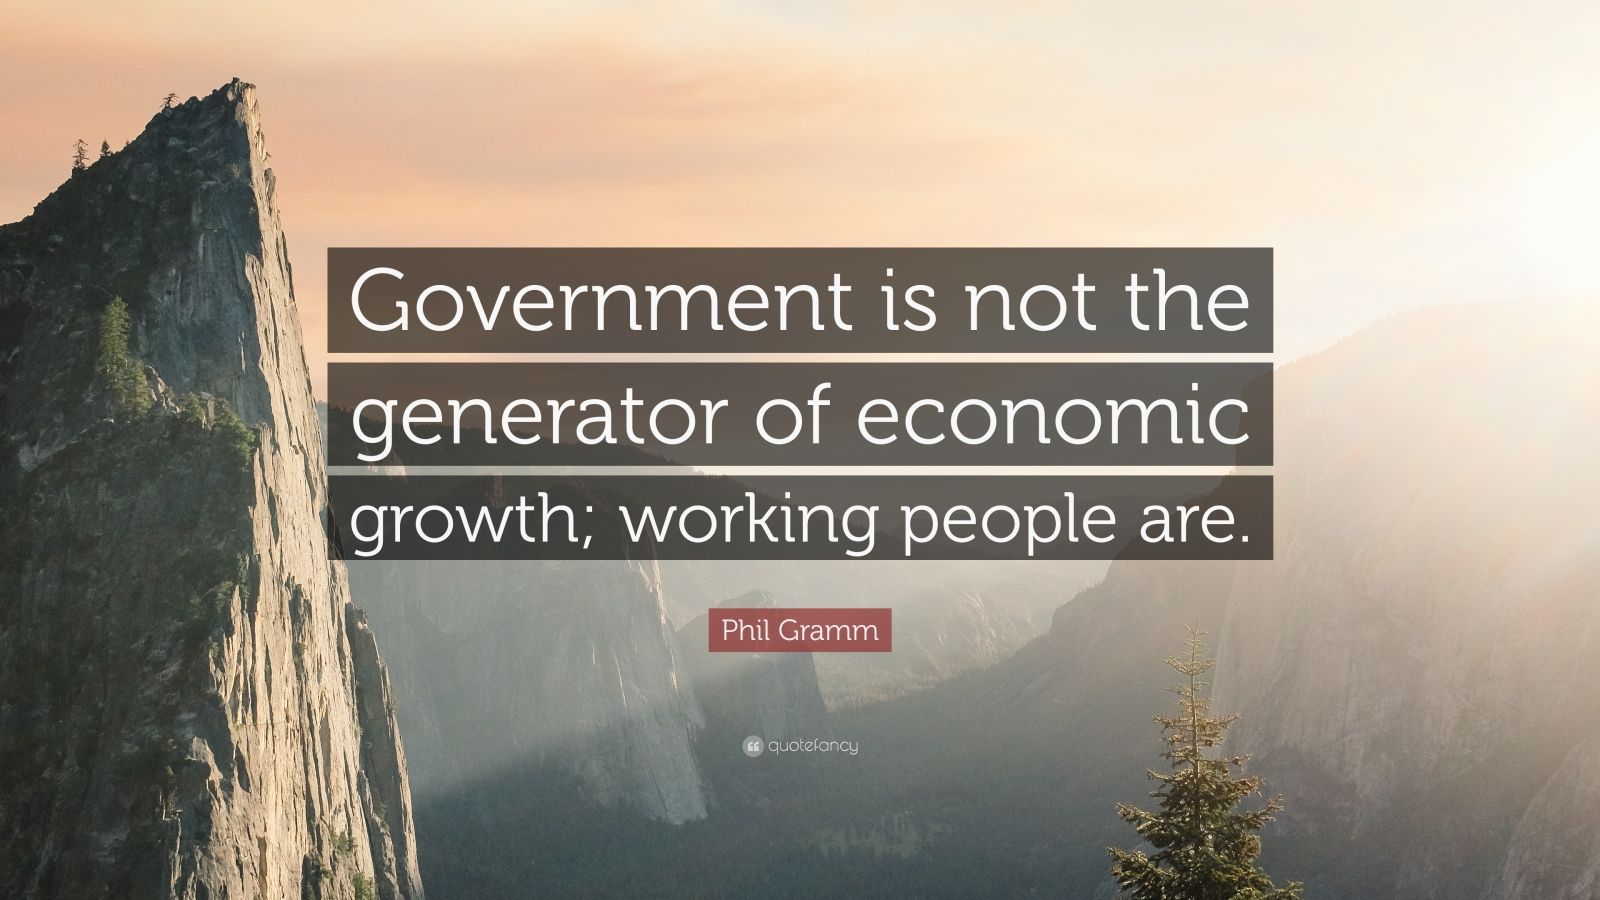 Phil Gramm Quote: “Government is not the generator of economic growth